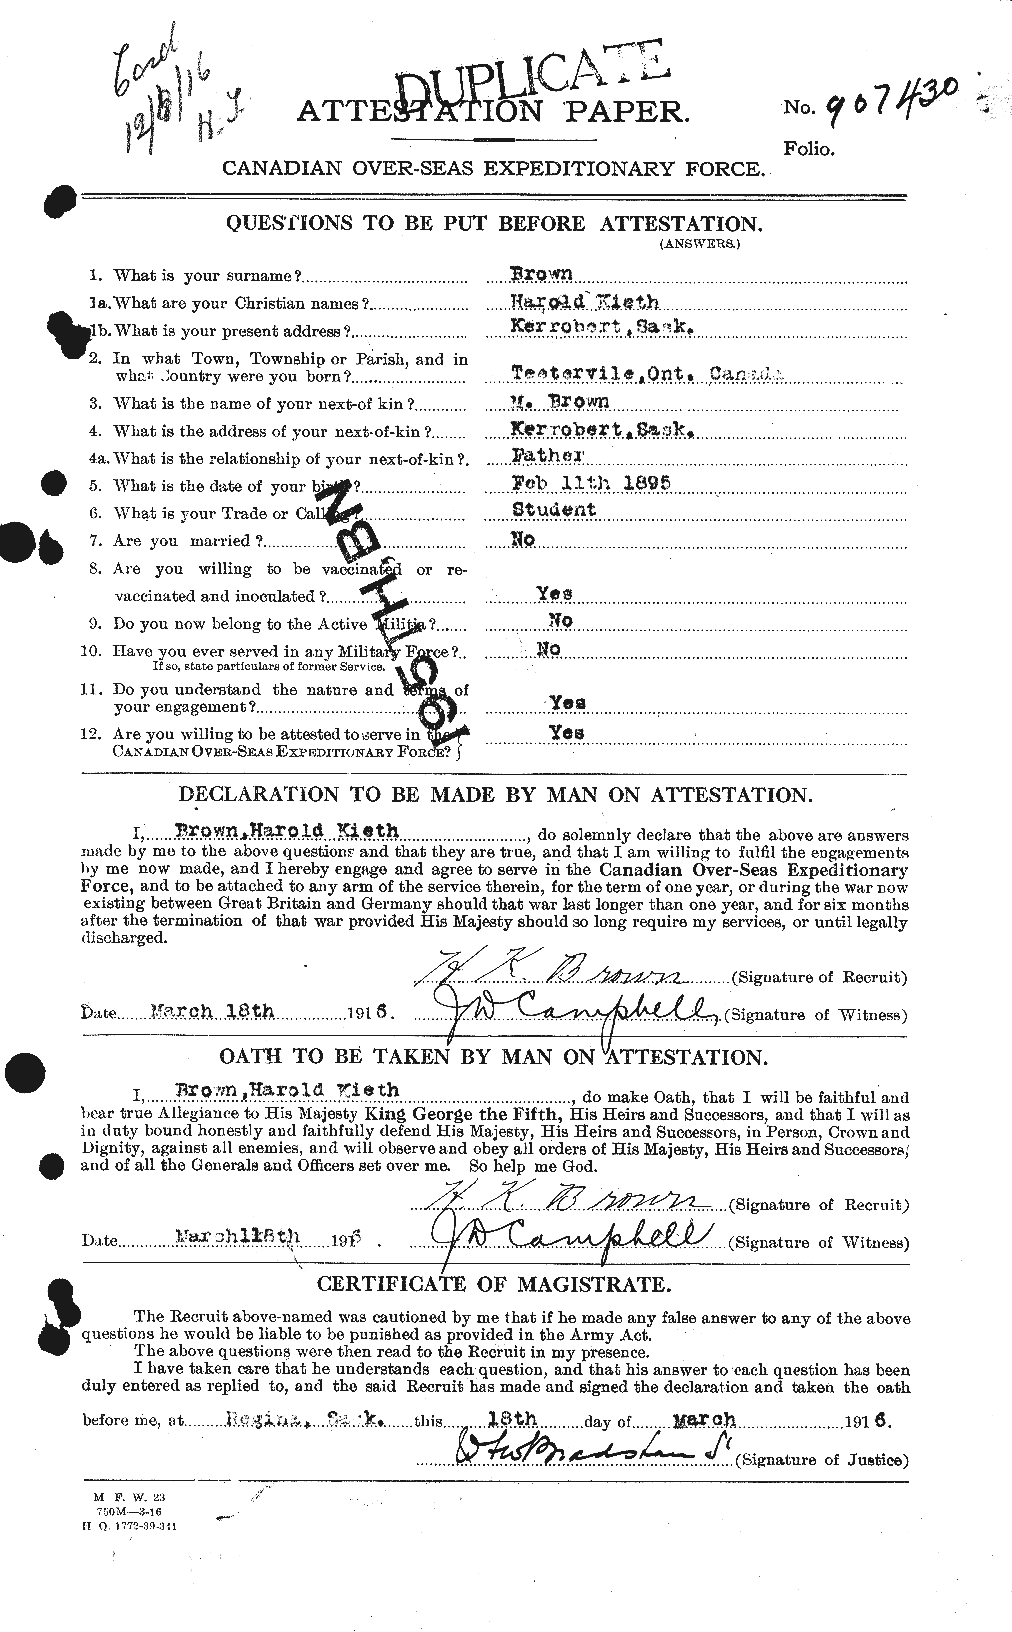 Personnel Records of the First World War - CEF 265366a